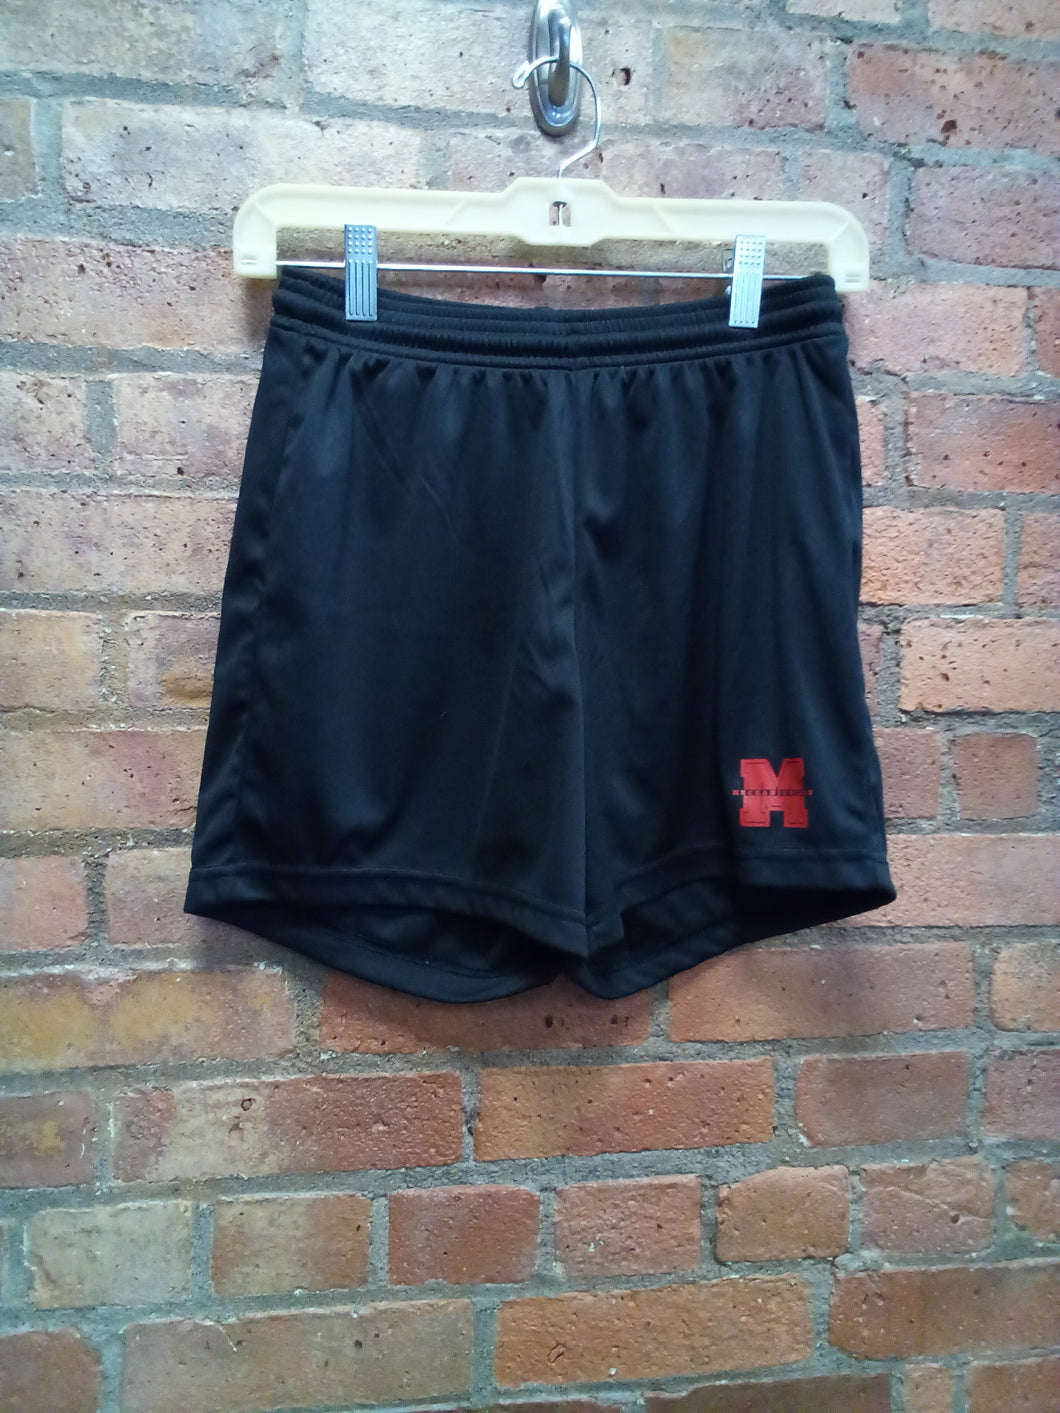 CLEARANCE - Mechanicville Ladies Shorts - Size Small